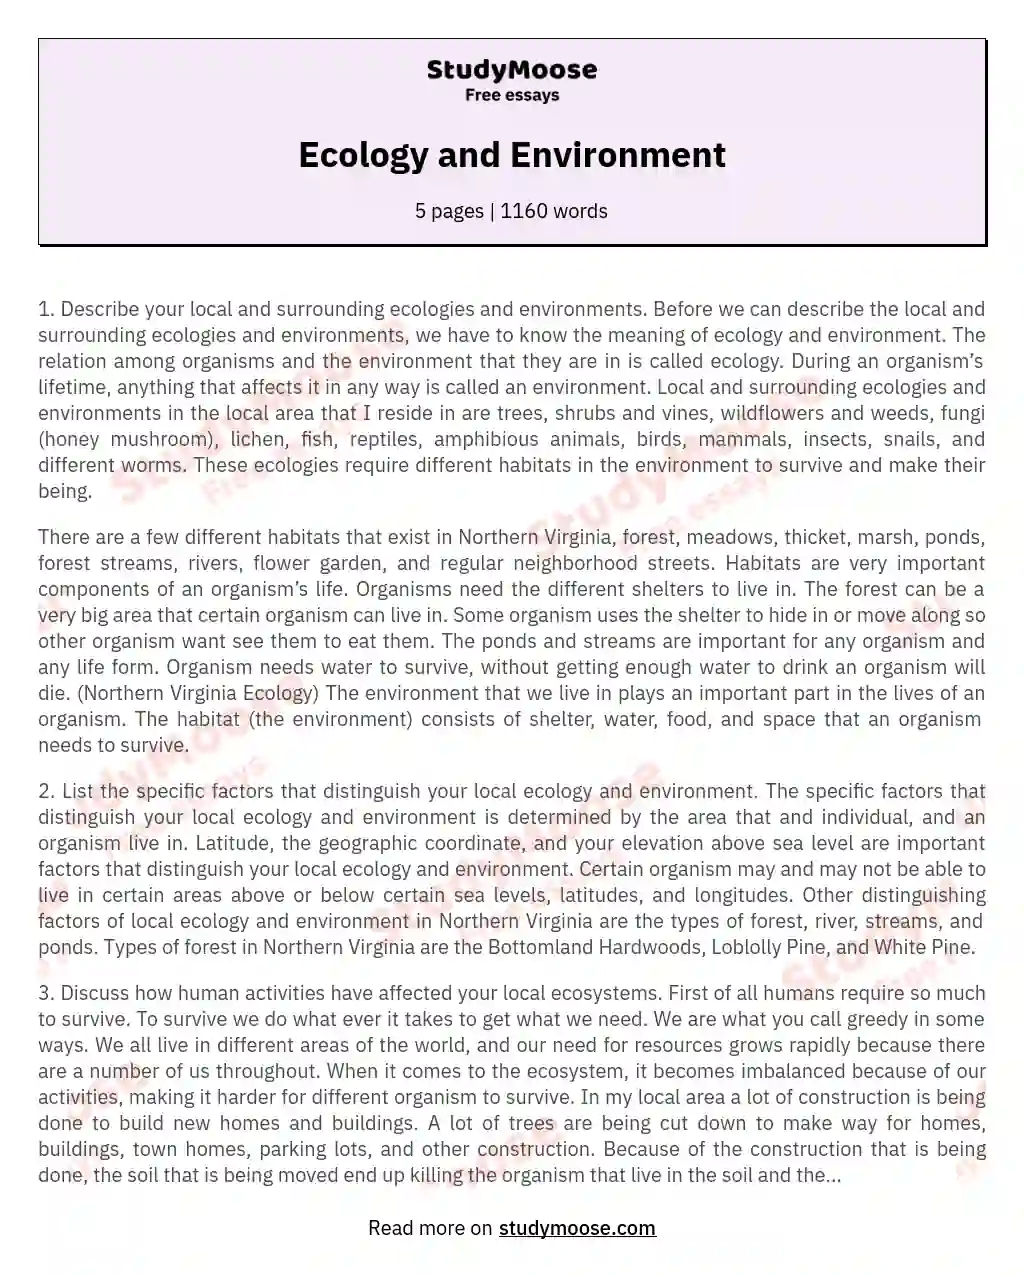 essay on ecology and ecosystem